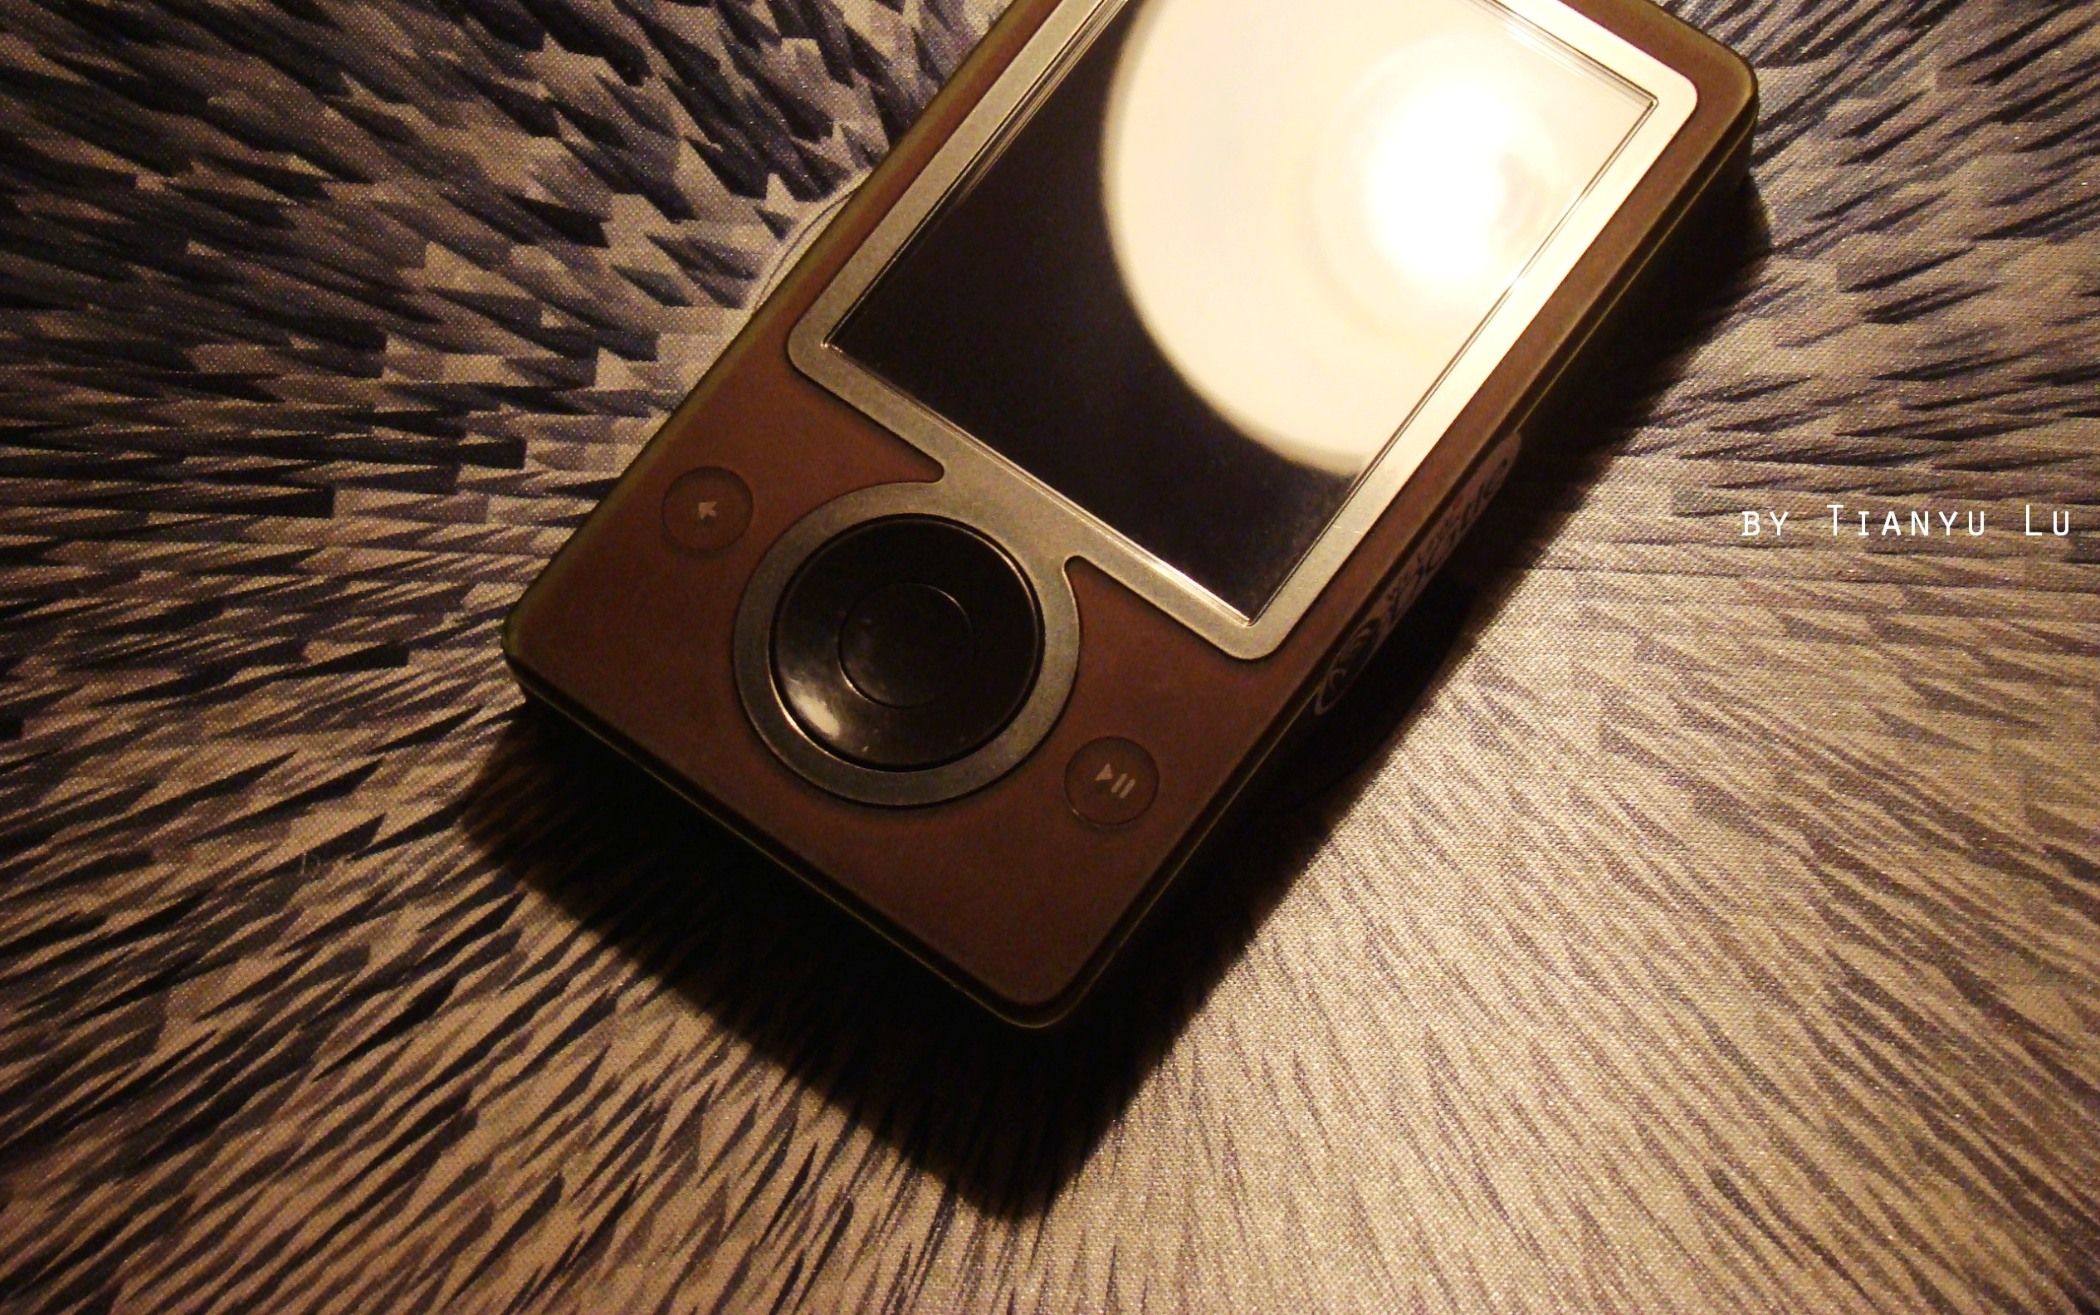 Close up of Microsoft Zune brown color on a textured surface